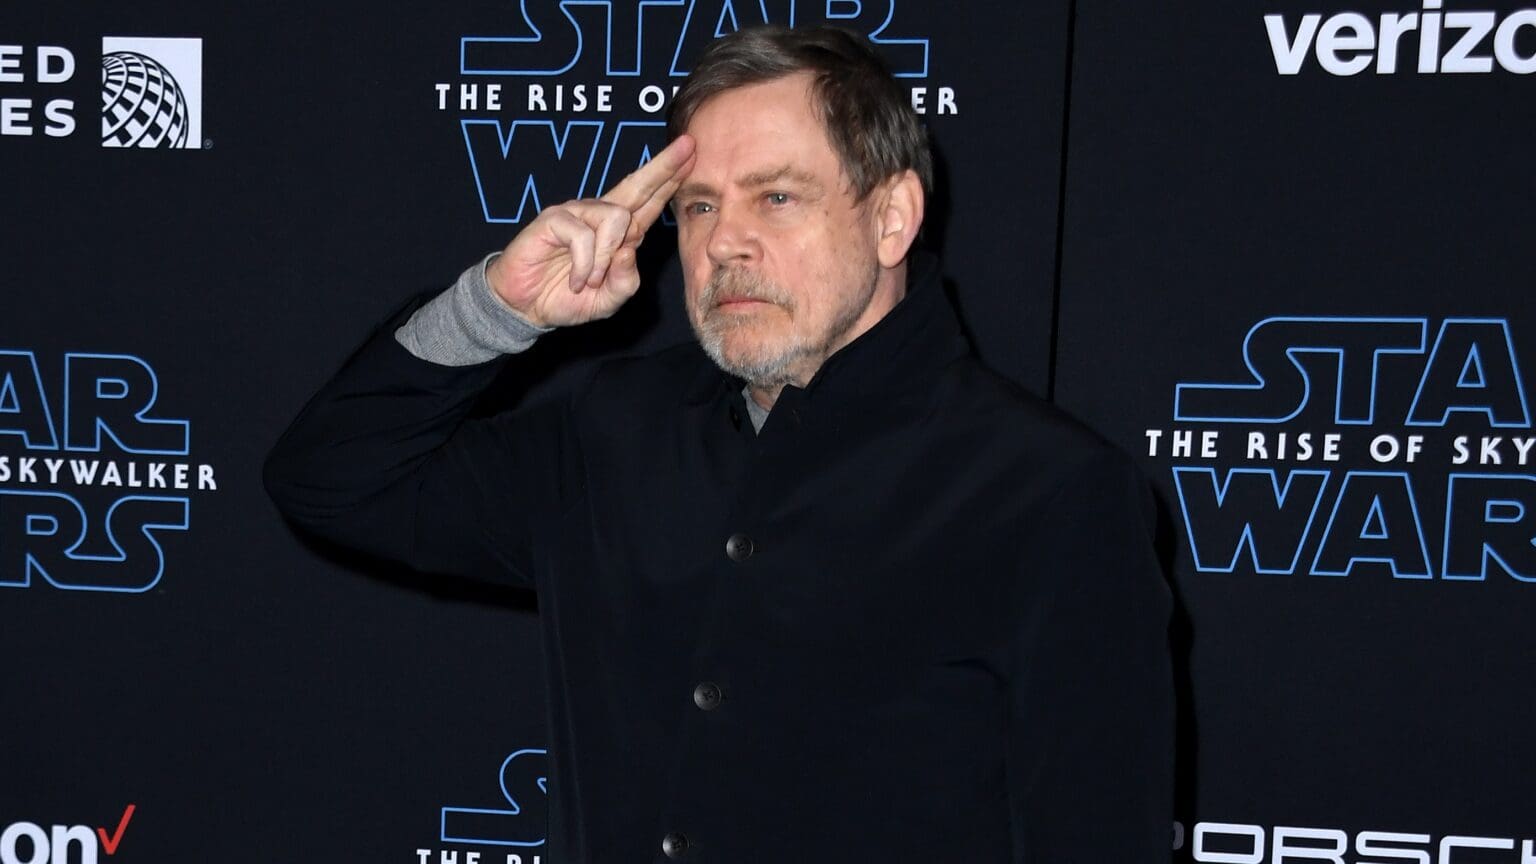 The Force is Strong with Ukraine: Mark Hamill Raises Funds for ‘Skywalkers’